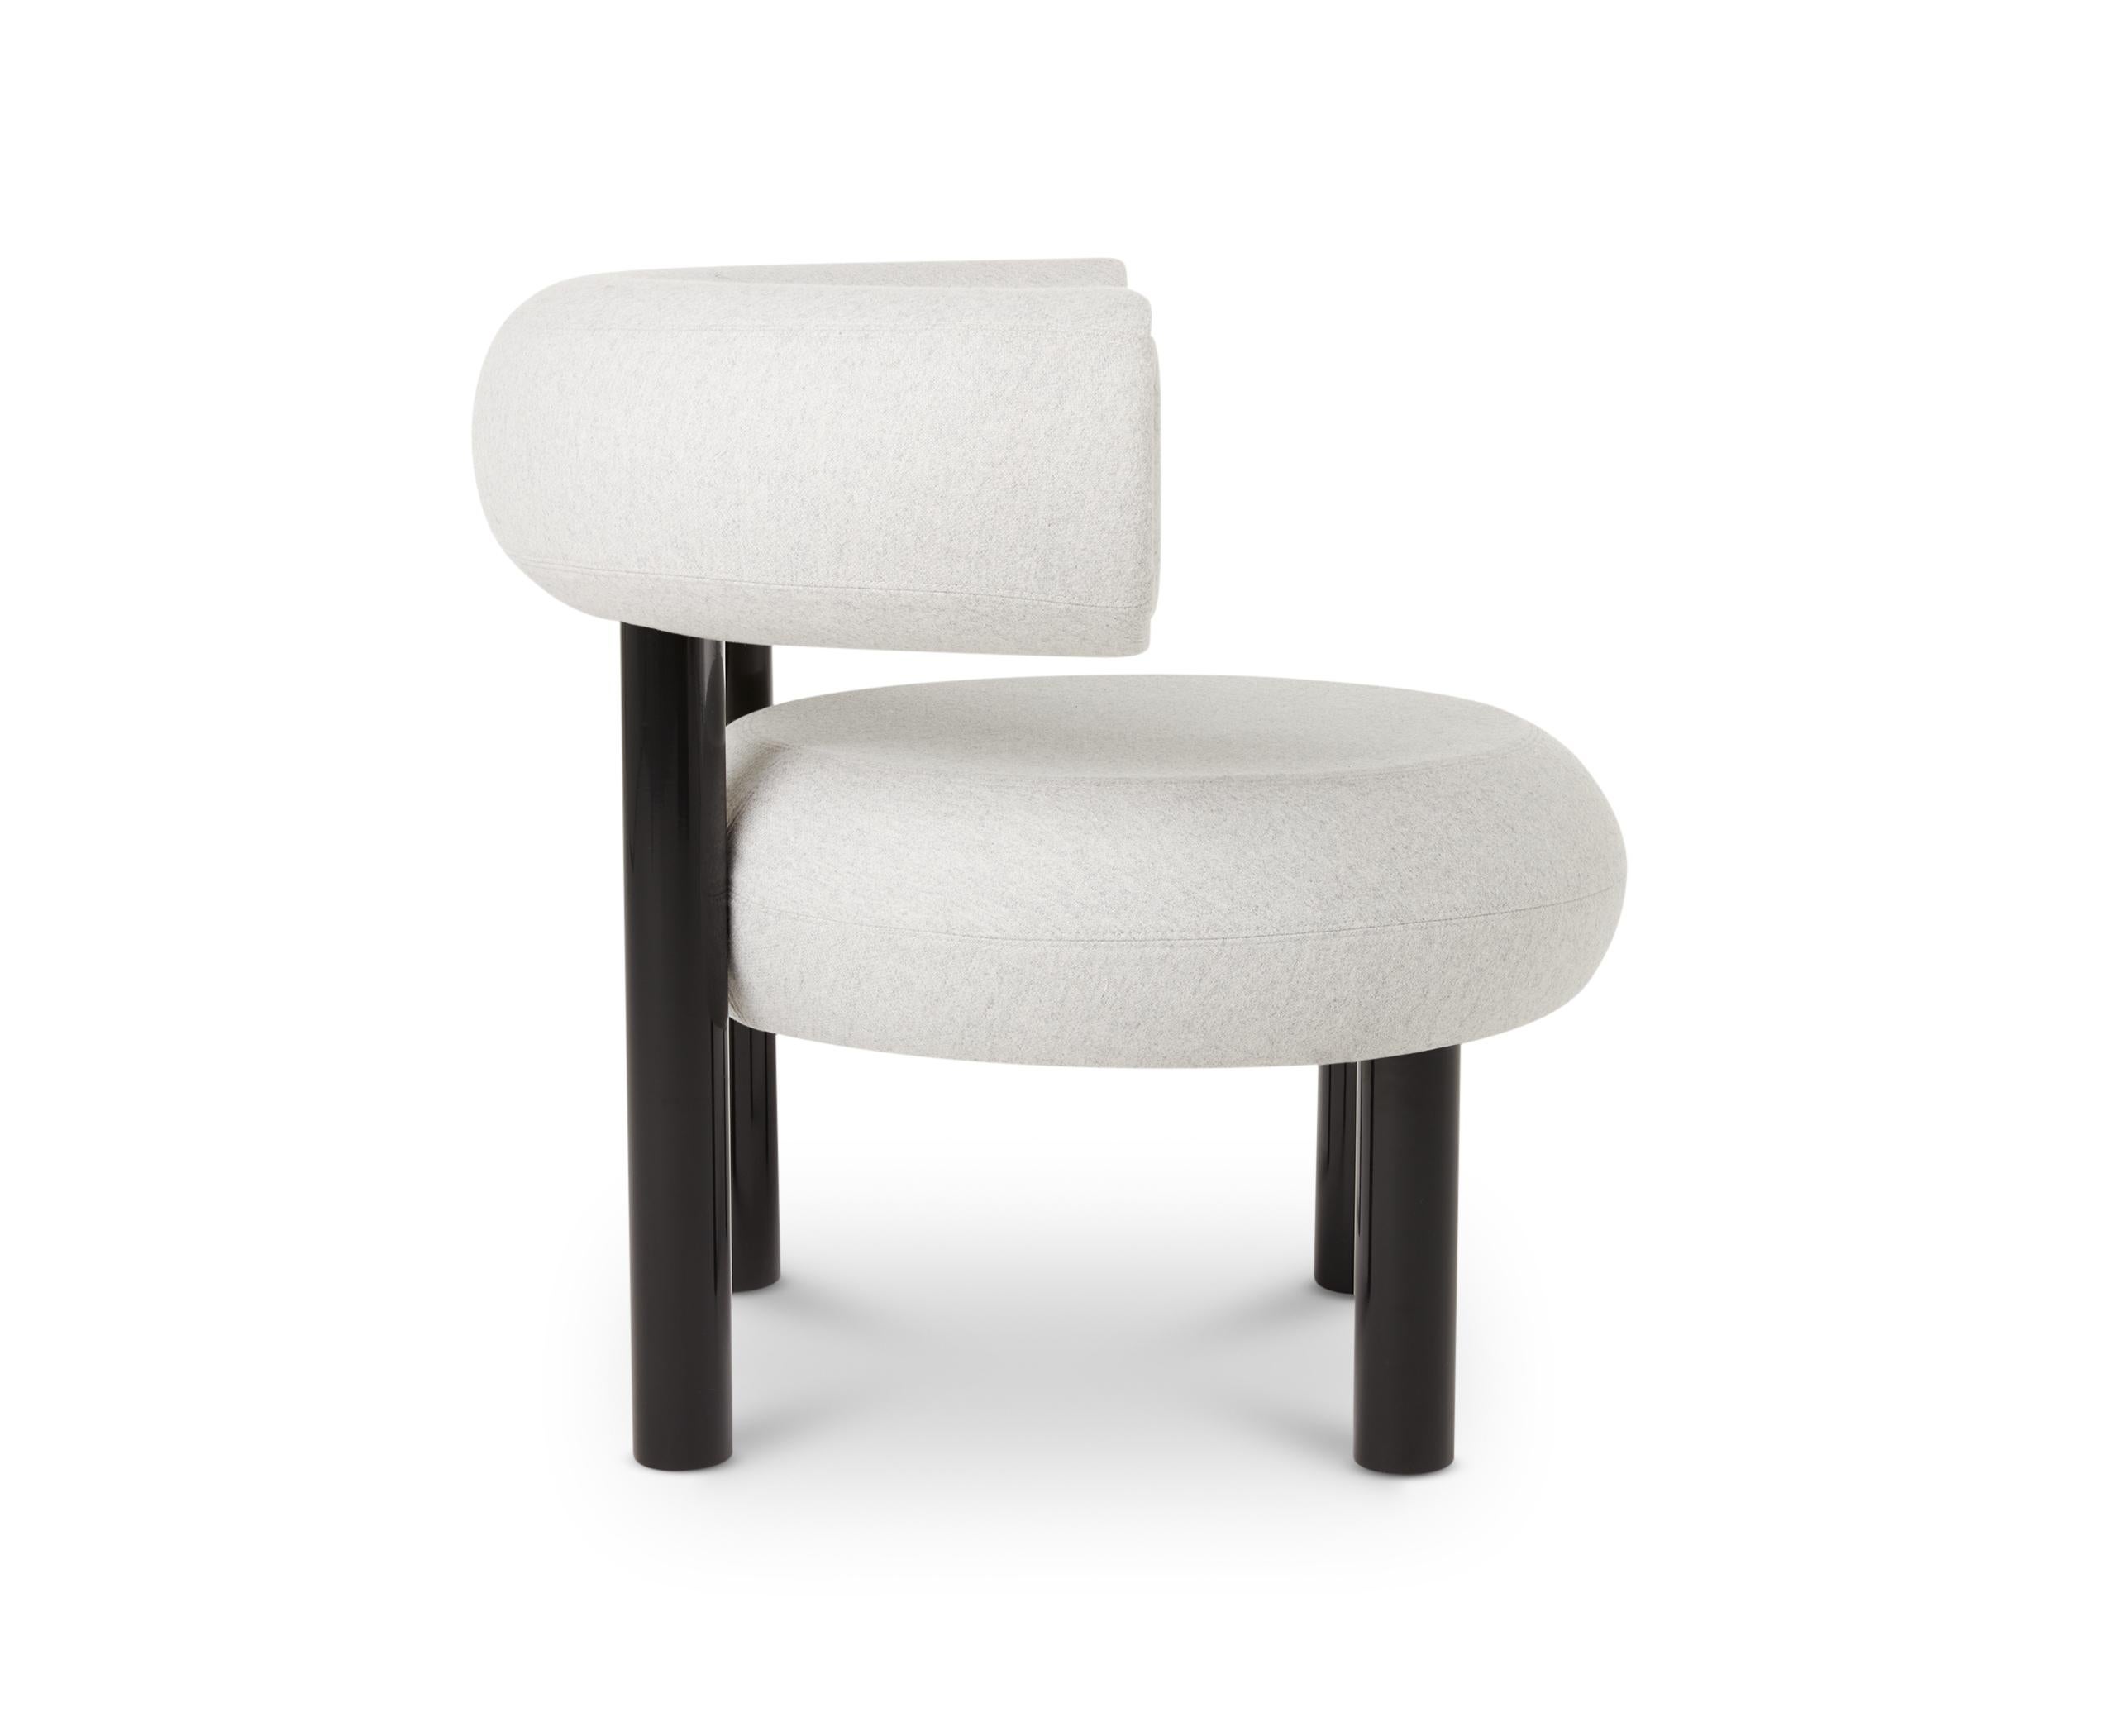 Gray (Mollie Melton 0103.jpg) FAT Lounge Chair with Black Legs by Tom Dixon 3